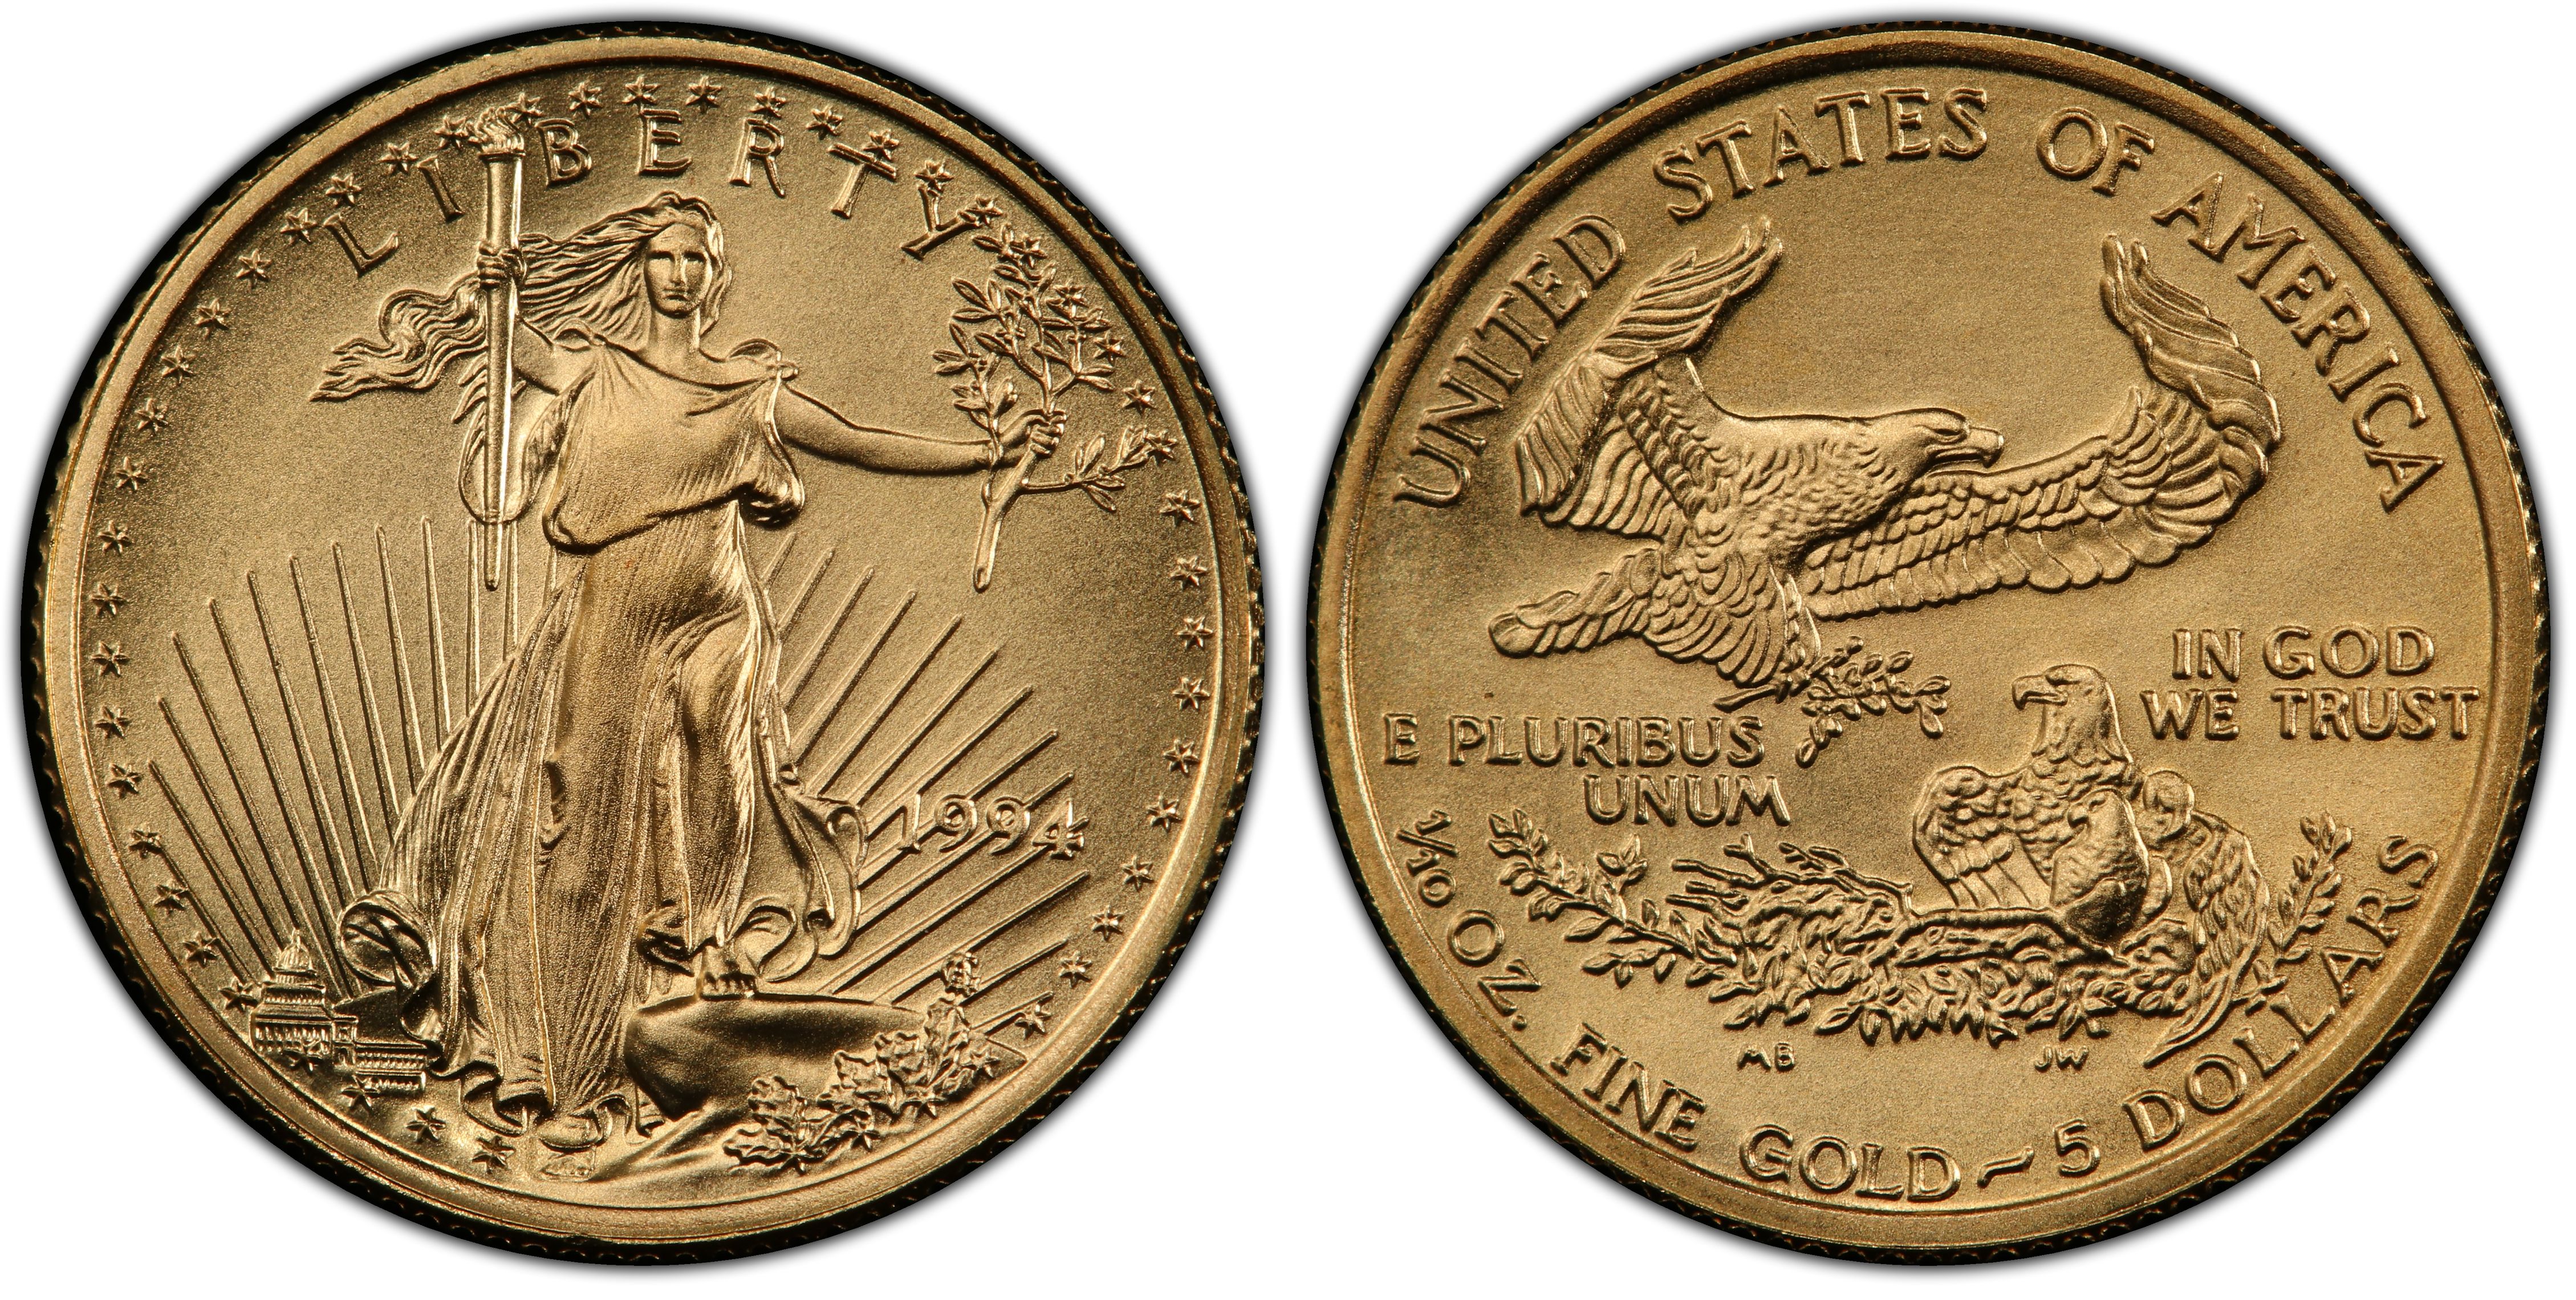 1994 $5 Gold Eagle (Regular Strike) Gold Eagles - PCGS CoinFacts